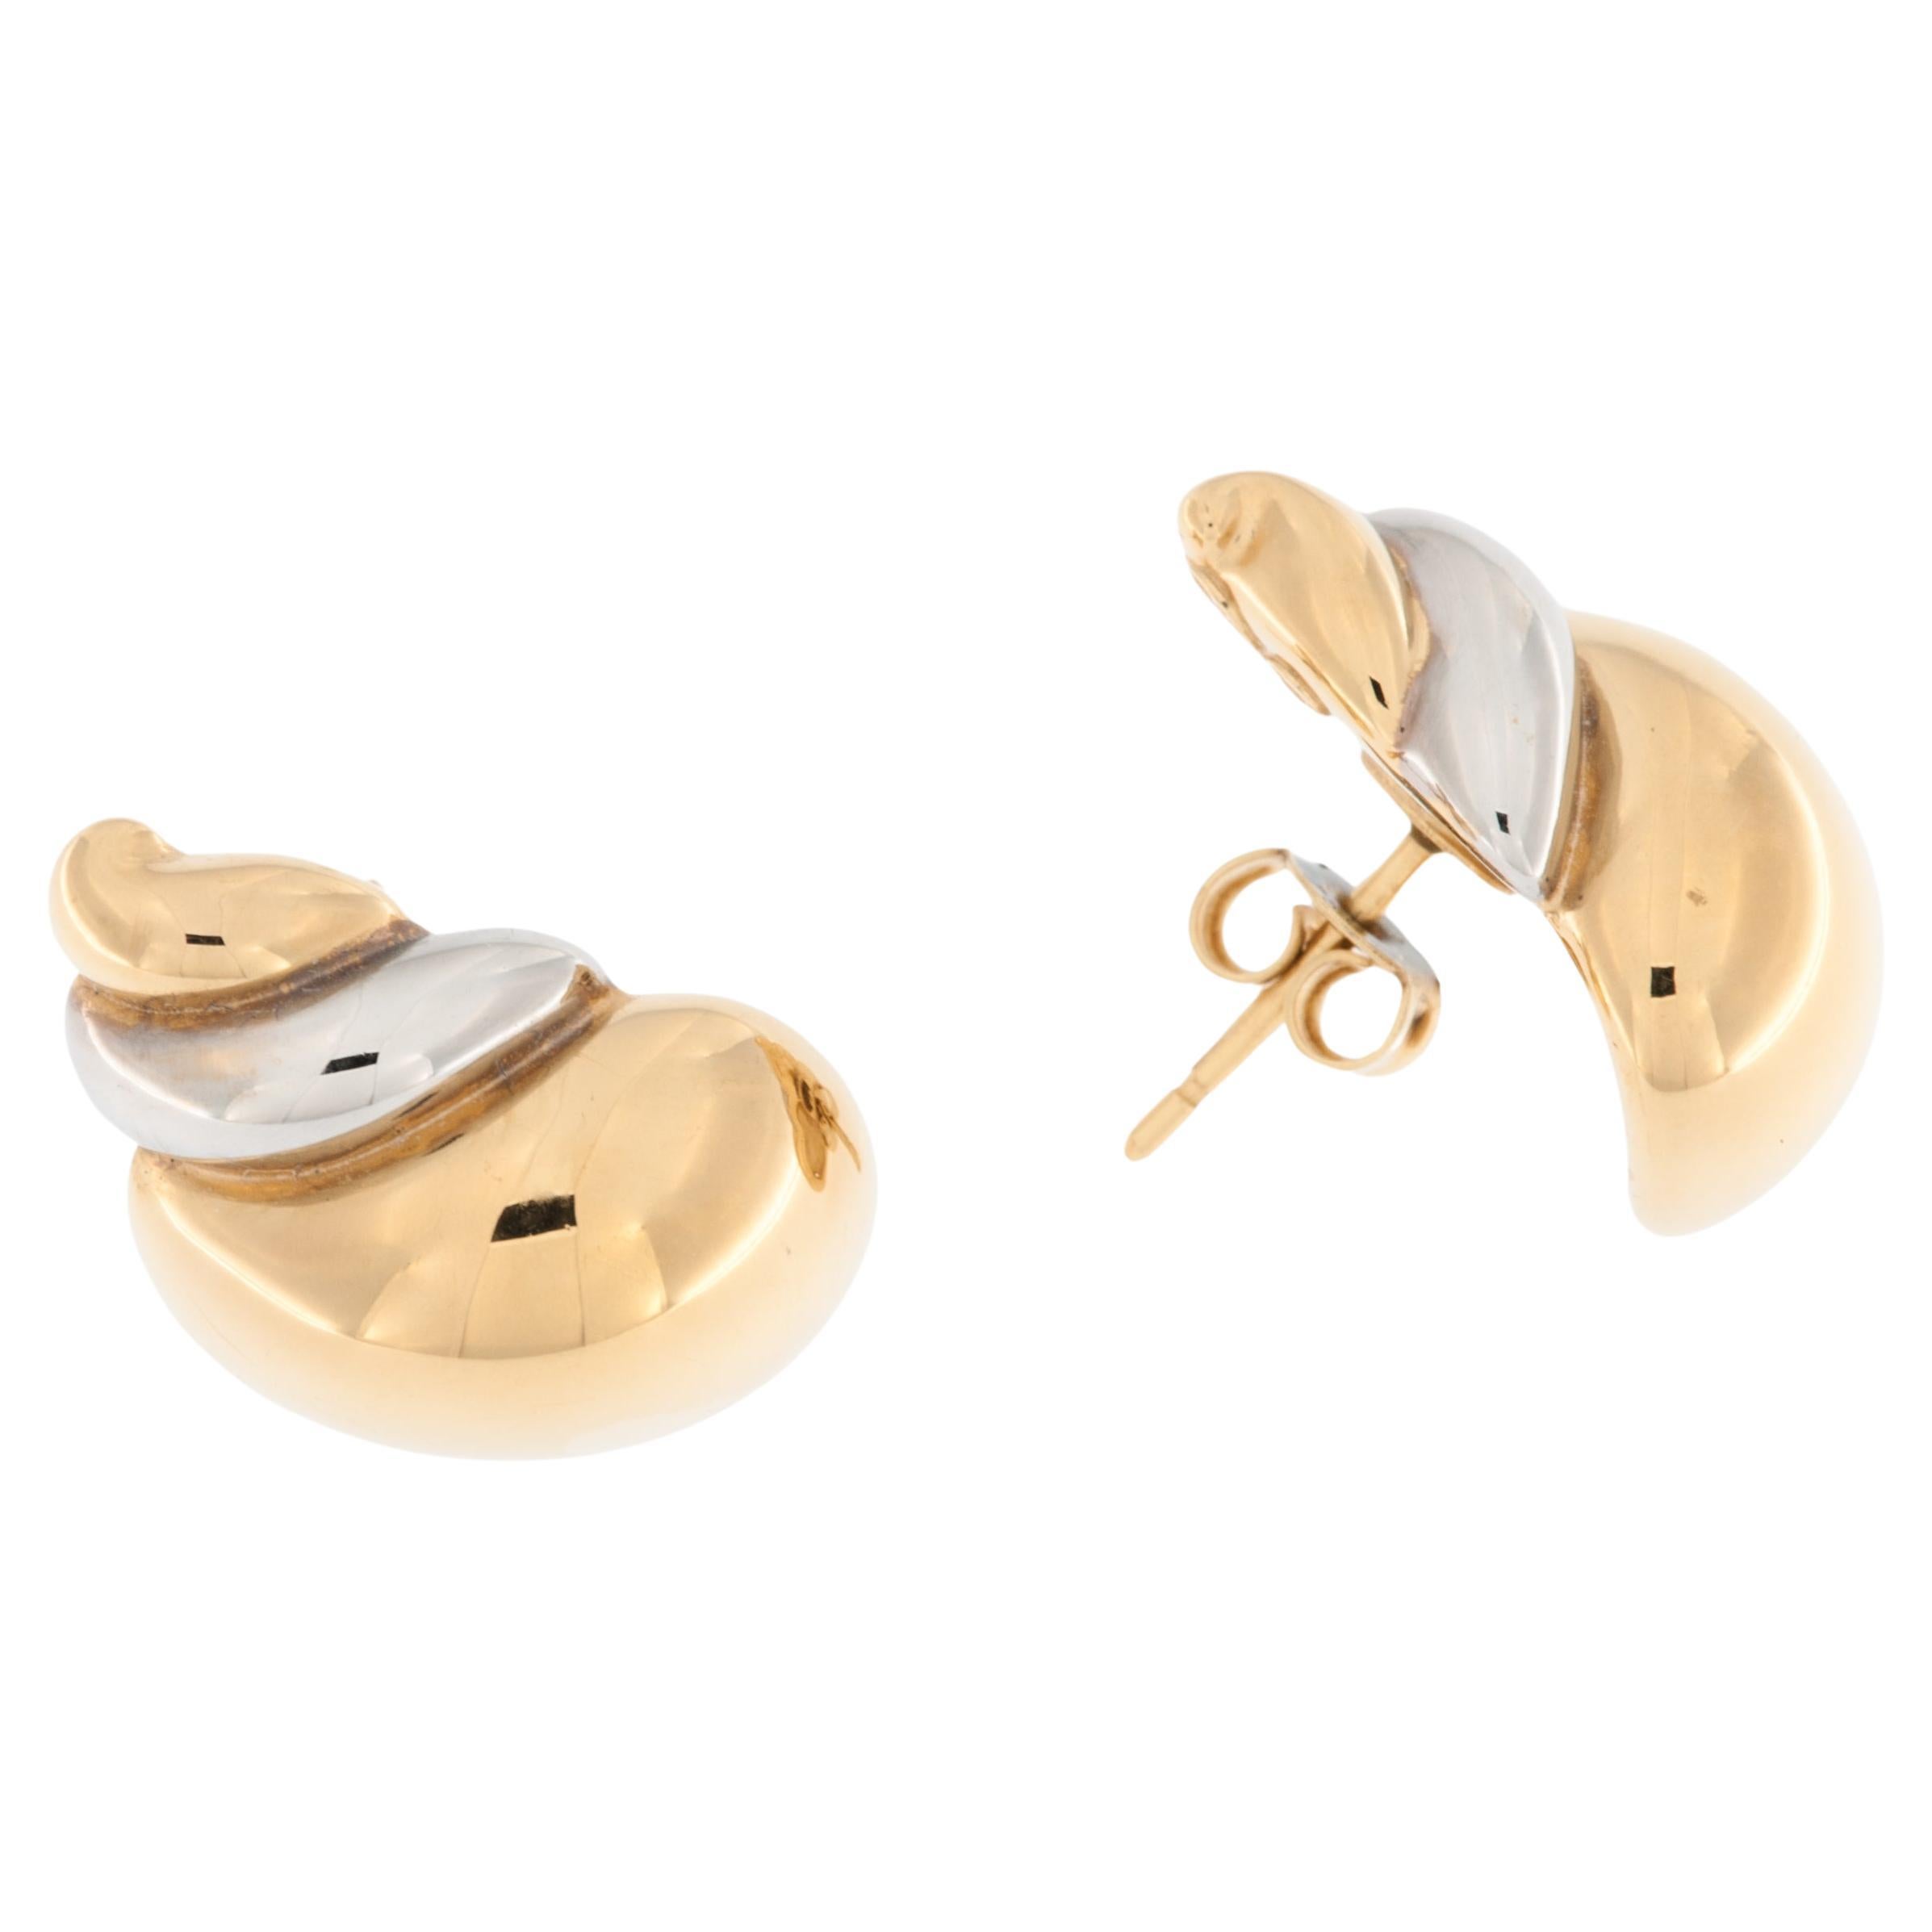 Italian Shell Earrings 18kt Yellow and White Gold